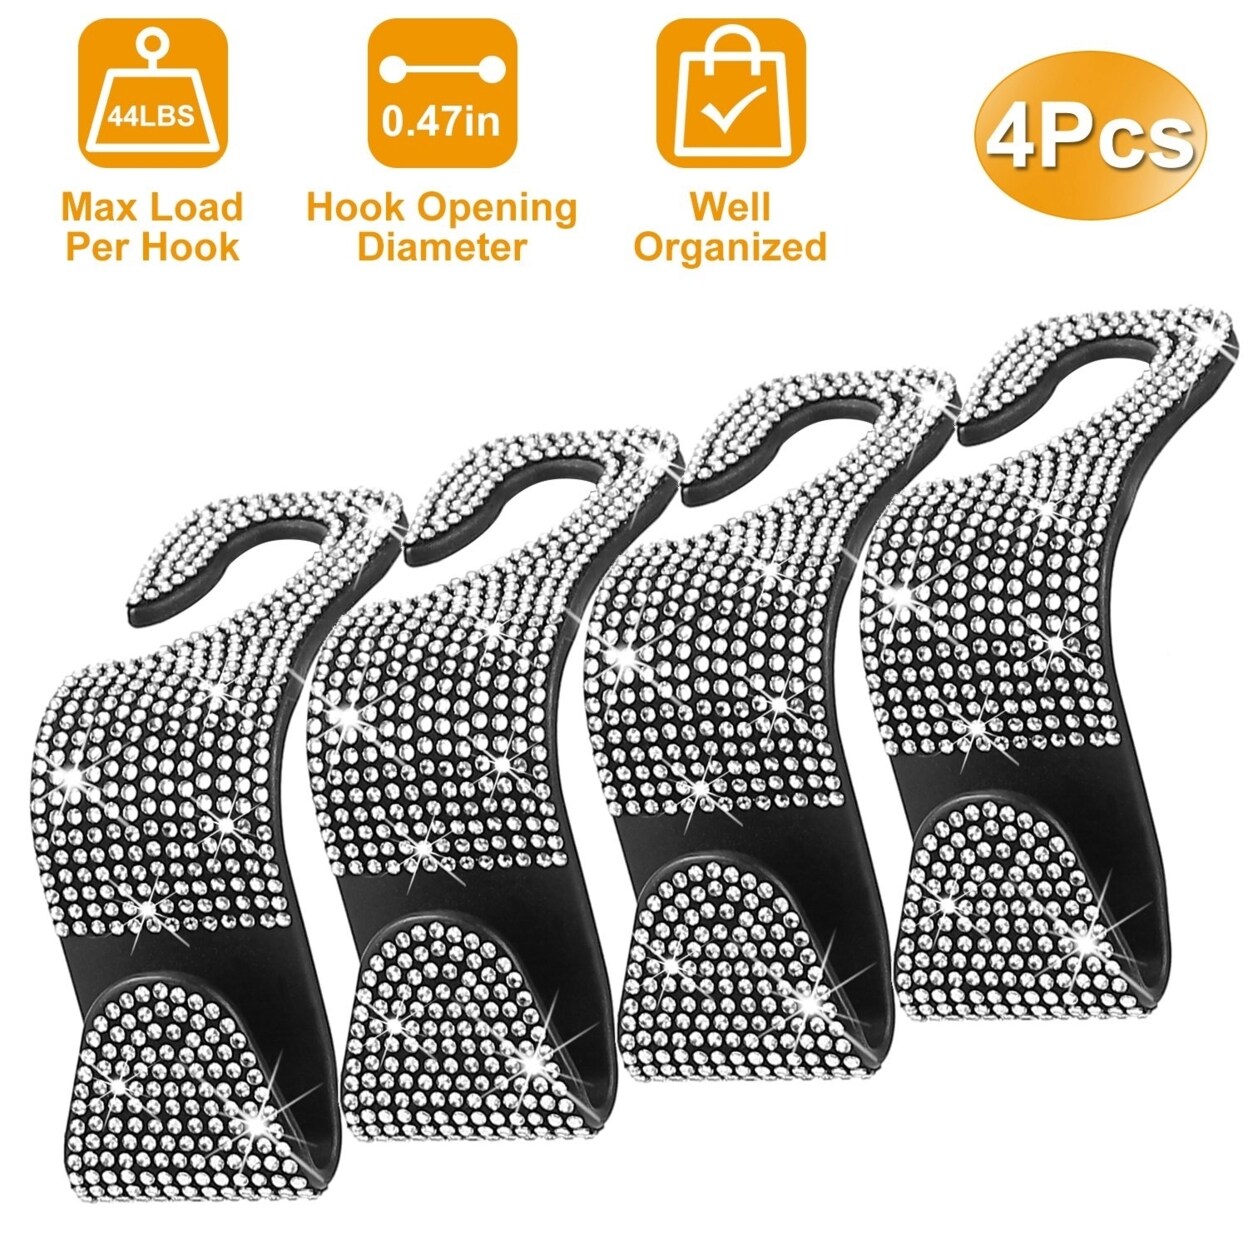 Purse Bling - Our purse organizer inserts come in a... | Facebook